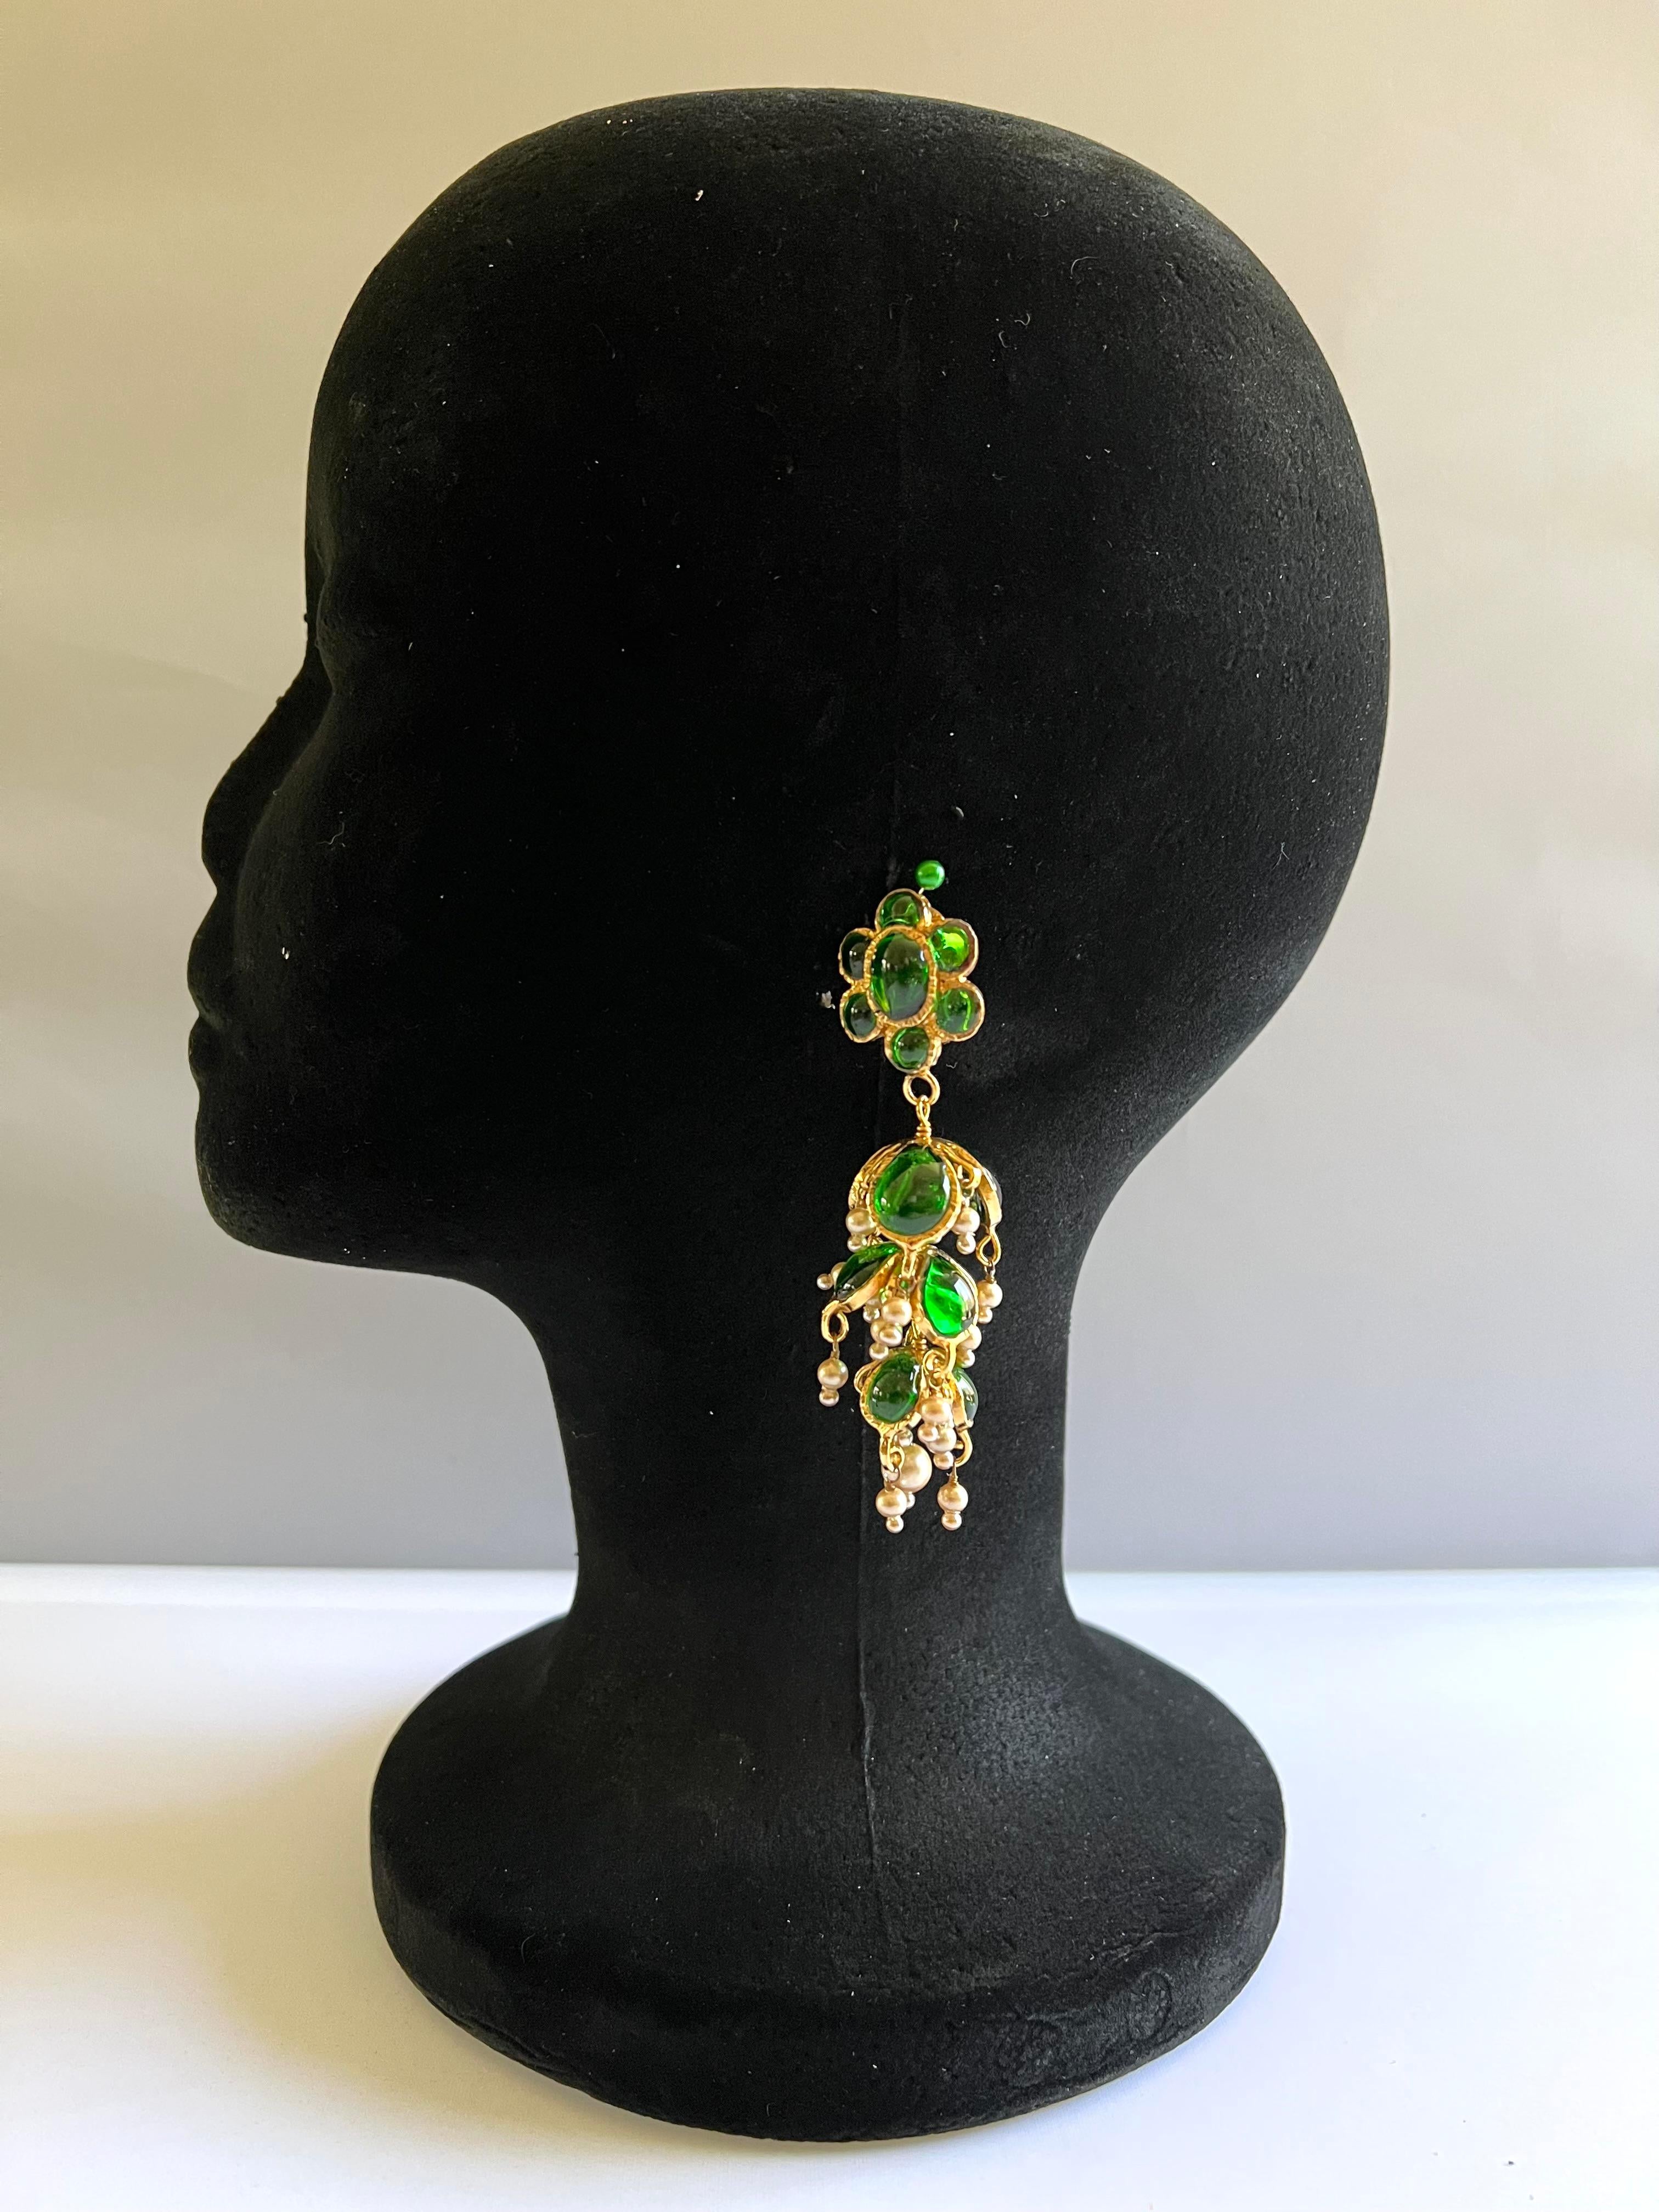 Exquisite scarce vintage Coco Chanel Anglo-Indian style statement clip-on earrings. The long earrings are comprised of gilt metal 